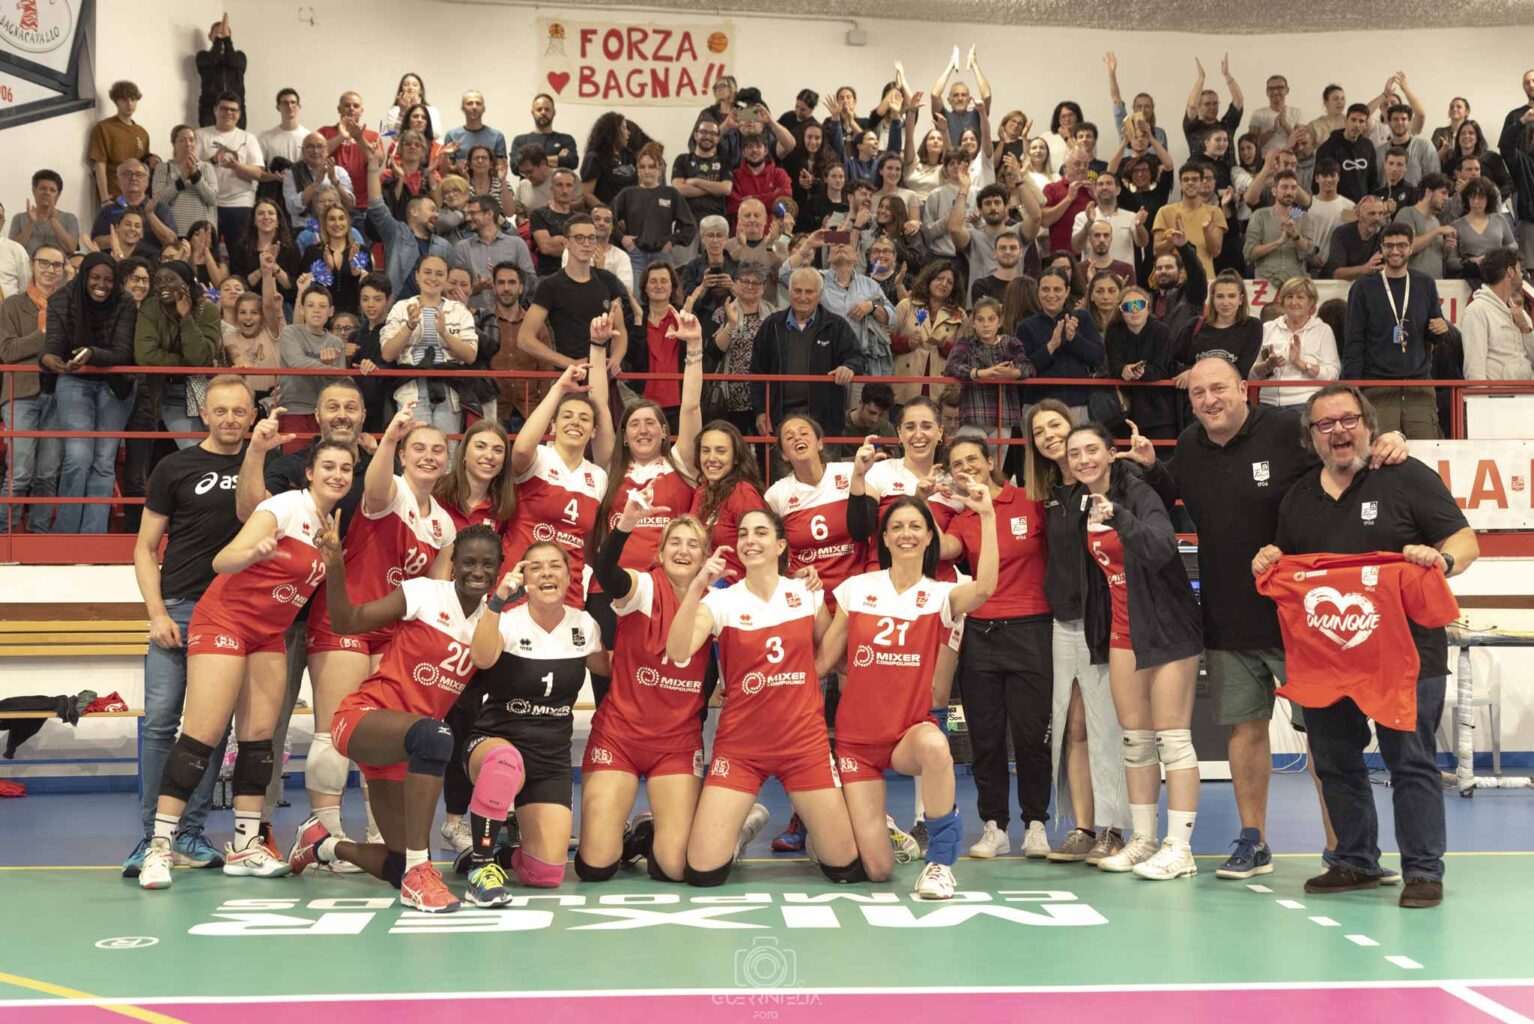 Mixer celebrates the promotion of Fulgur Volleyball to Series C in Bagnacavallo